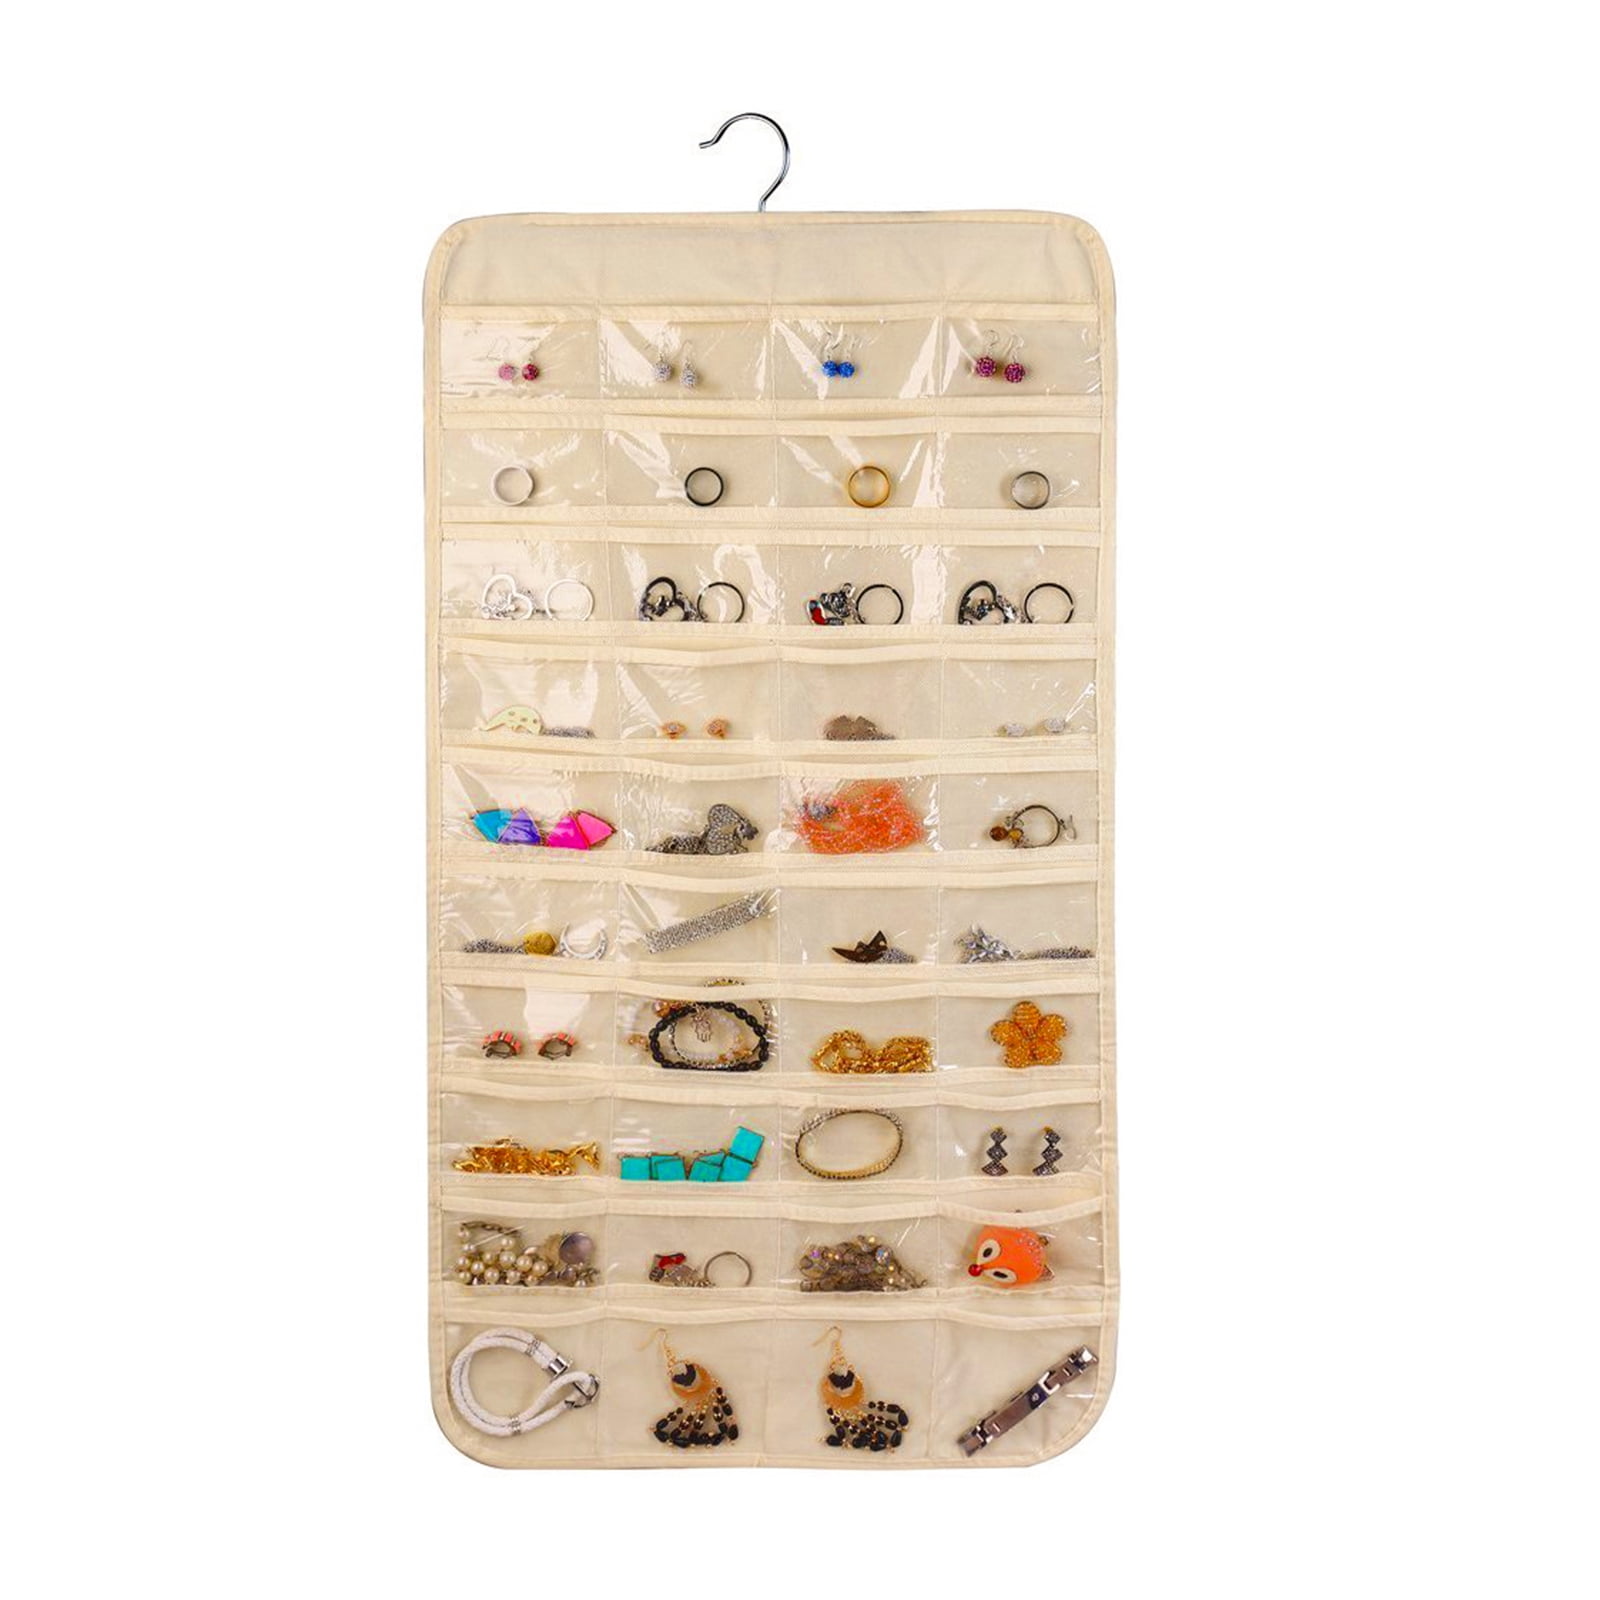 80 Pocket Double Side Hanging Jewelry Organizer Accessories Holder ...